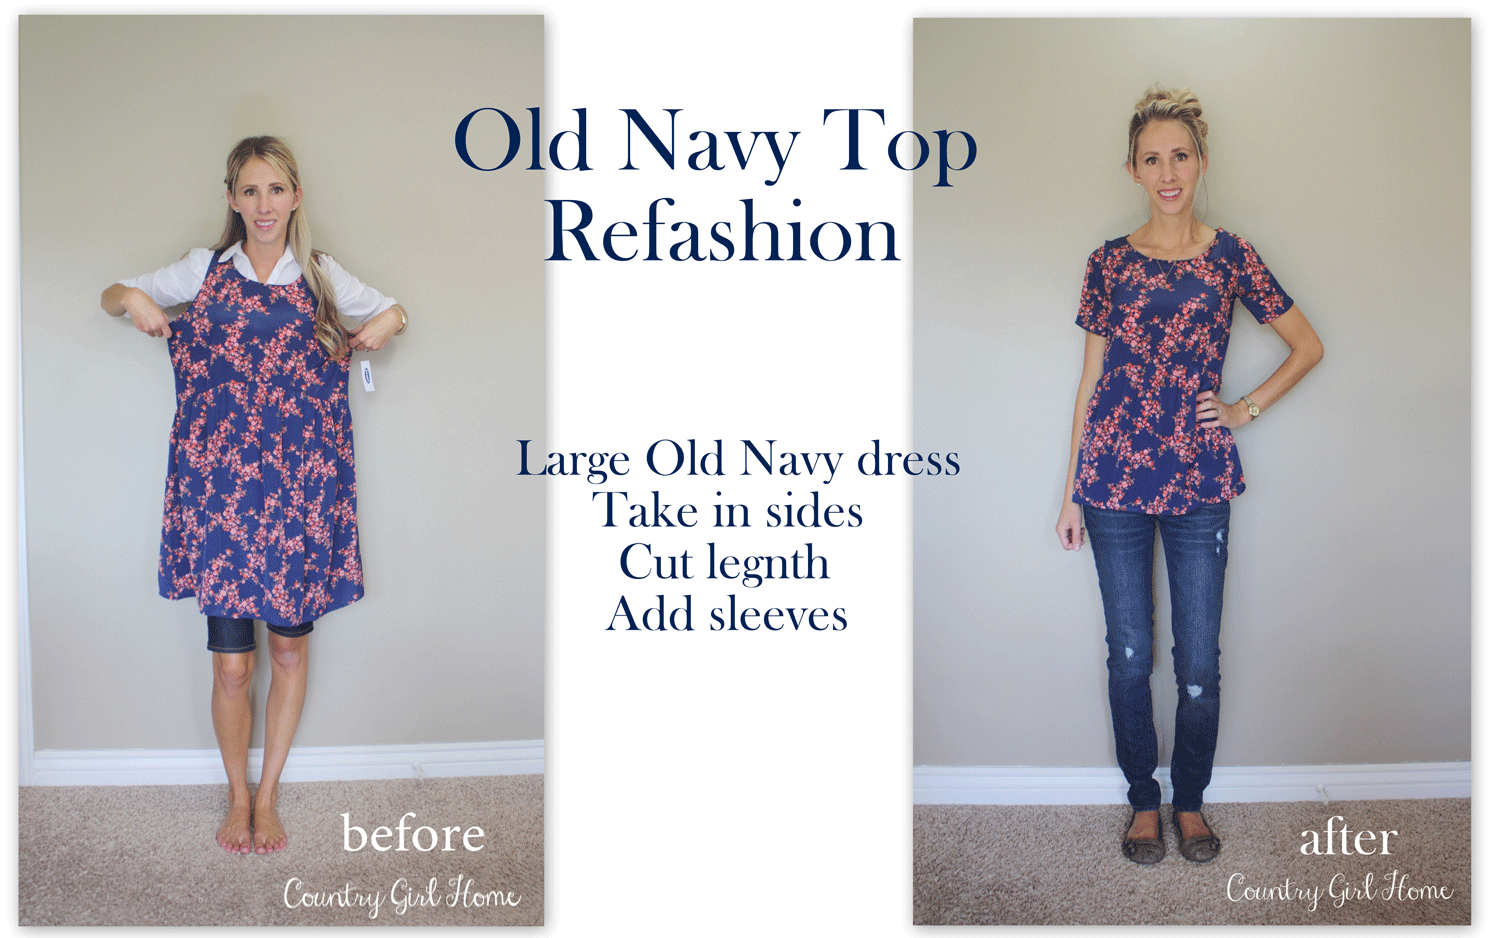 COUNTRY GIRL HOME : Old Navy top refashion